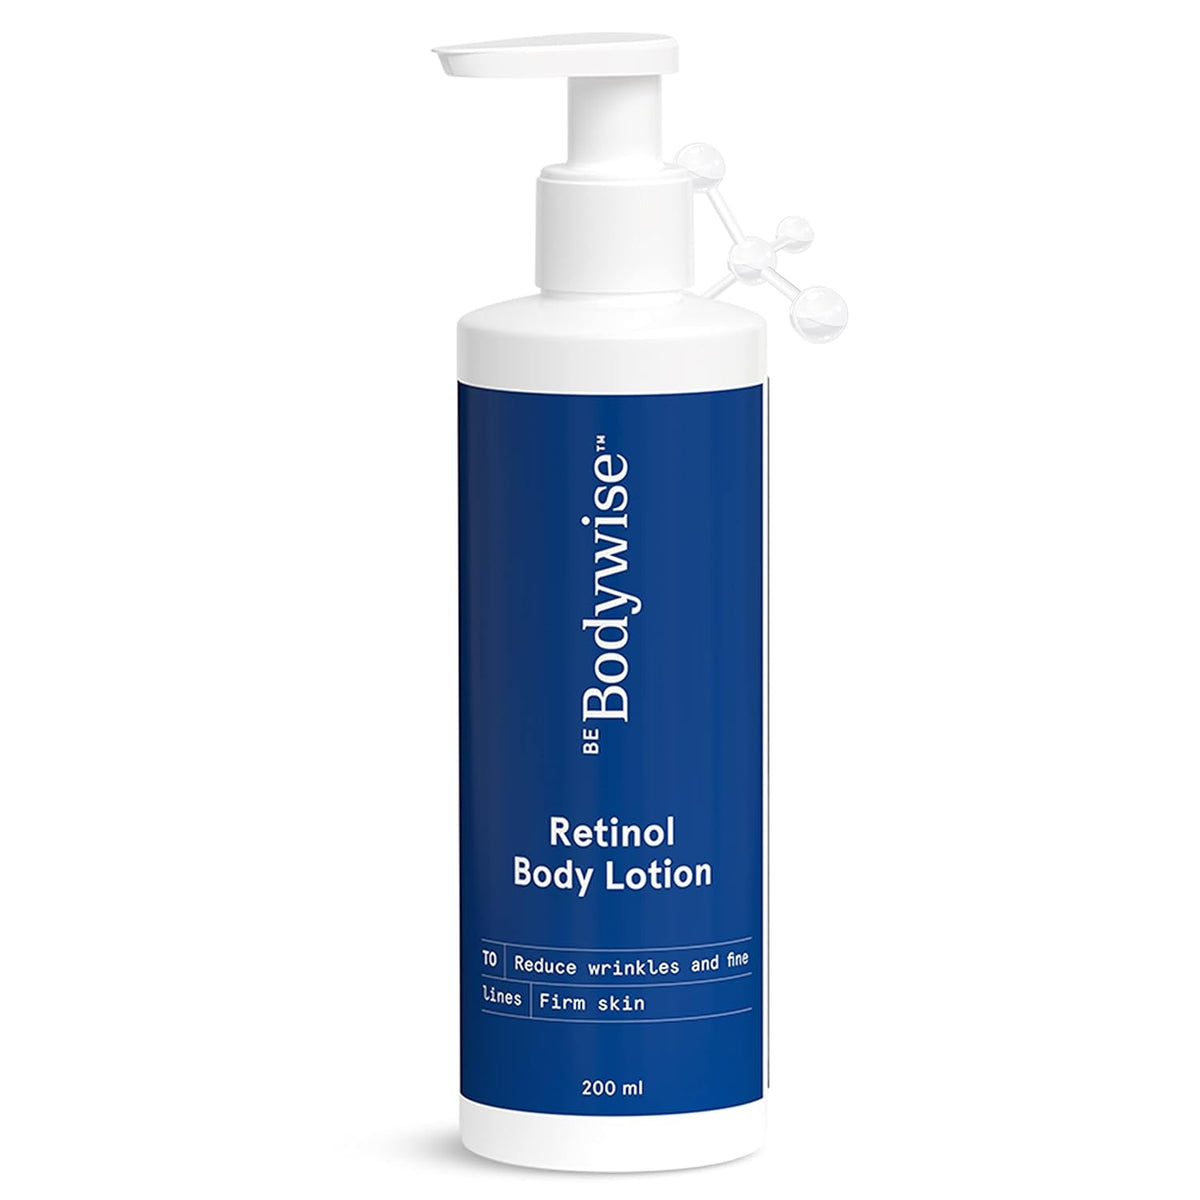 Be Bodywise 0.1% Retinol Body Lotion 200 ml | With 0.2% Niacinamide, Shea Butter | Fights Visible Signs of Aging & Reduces Stretch Marks | For Brighter & Even-Toned Skin